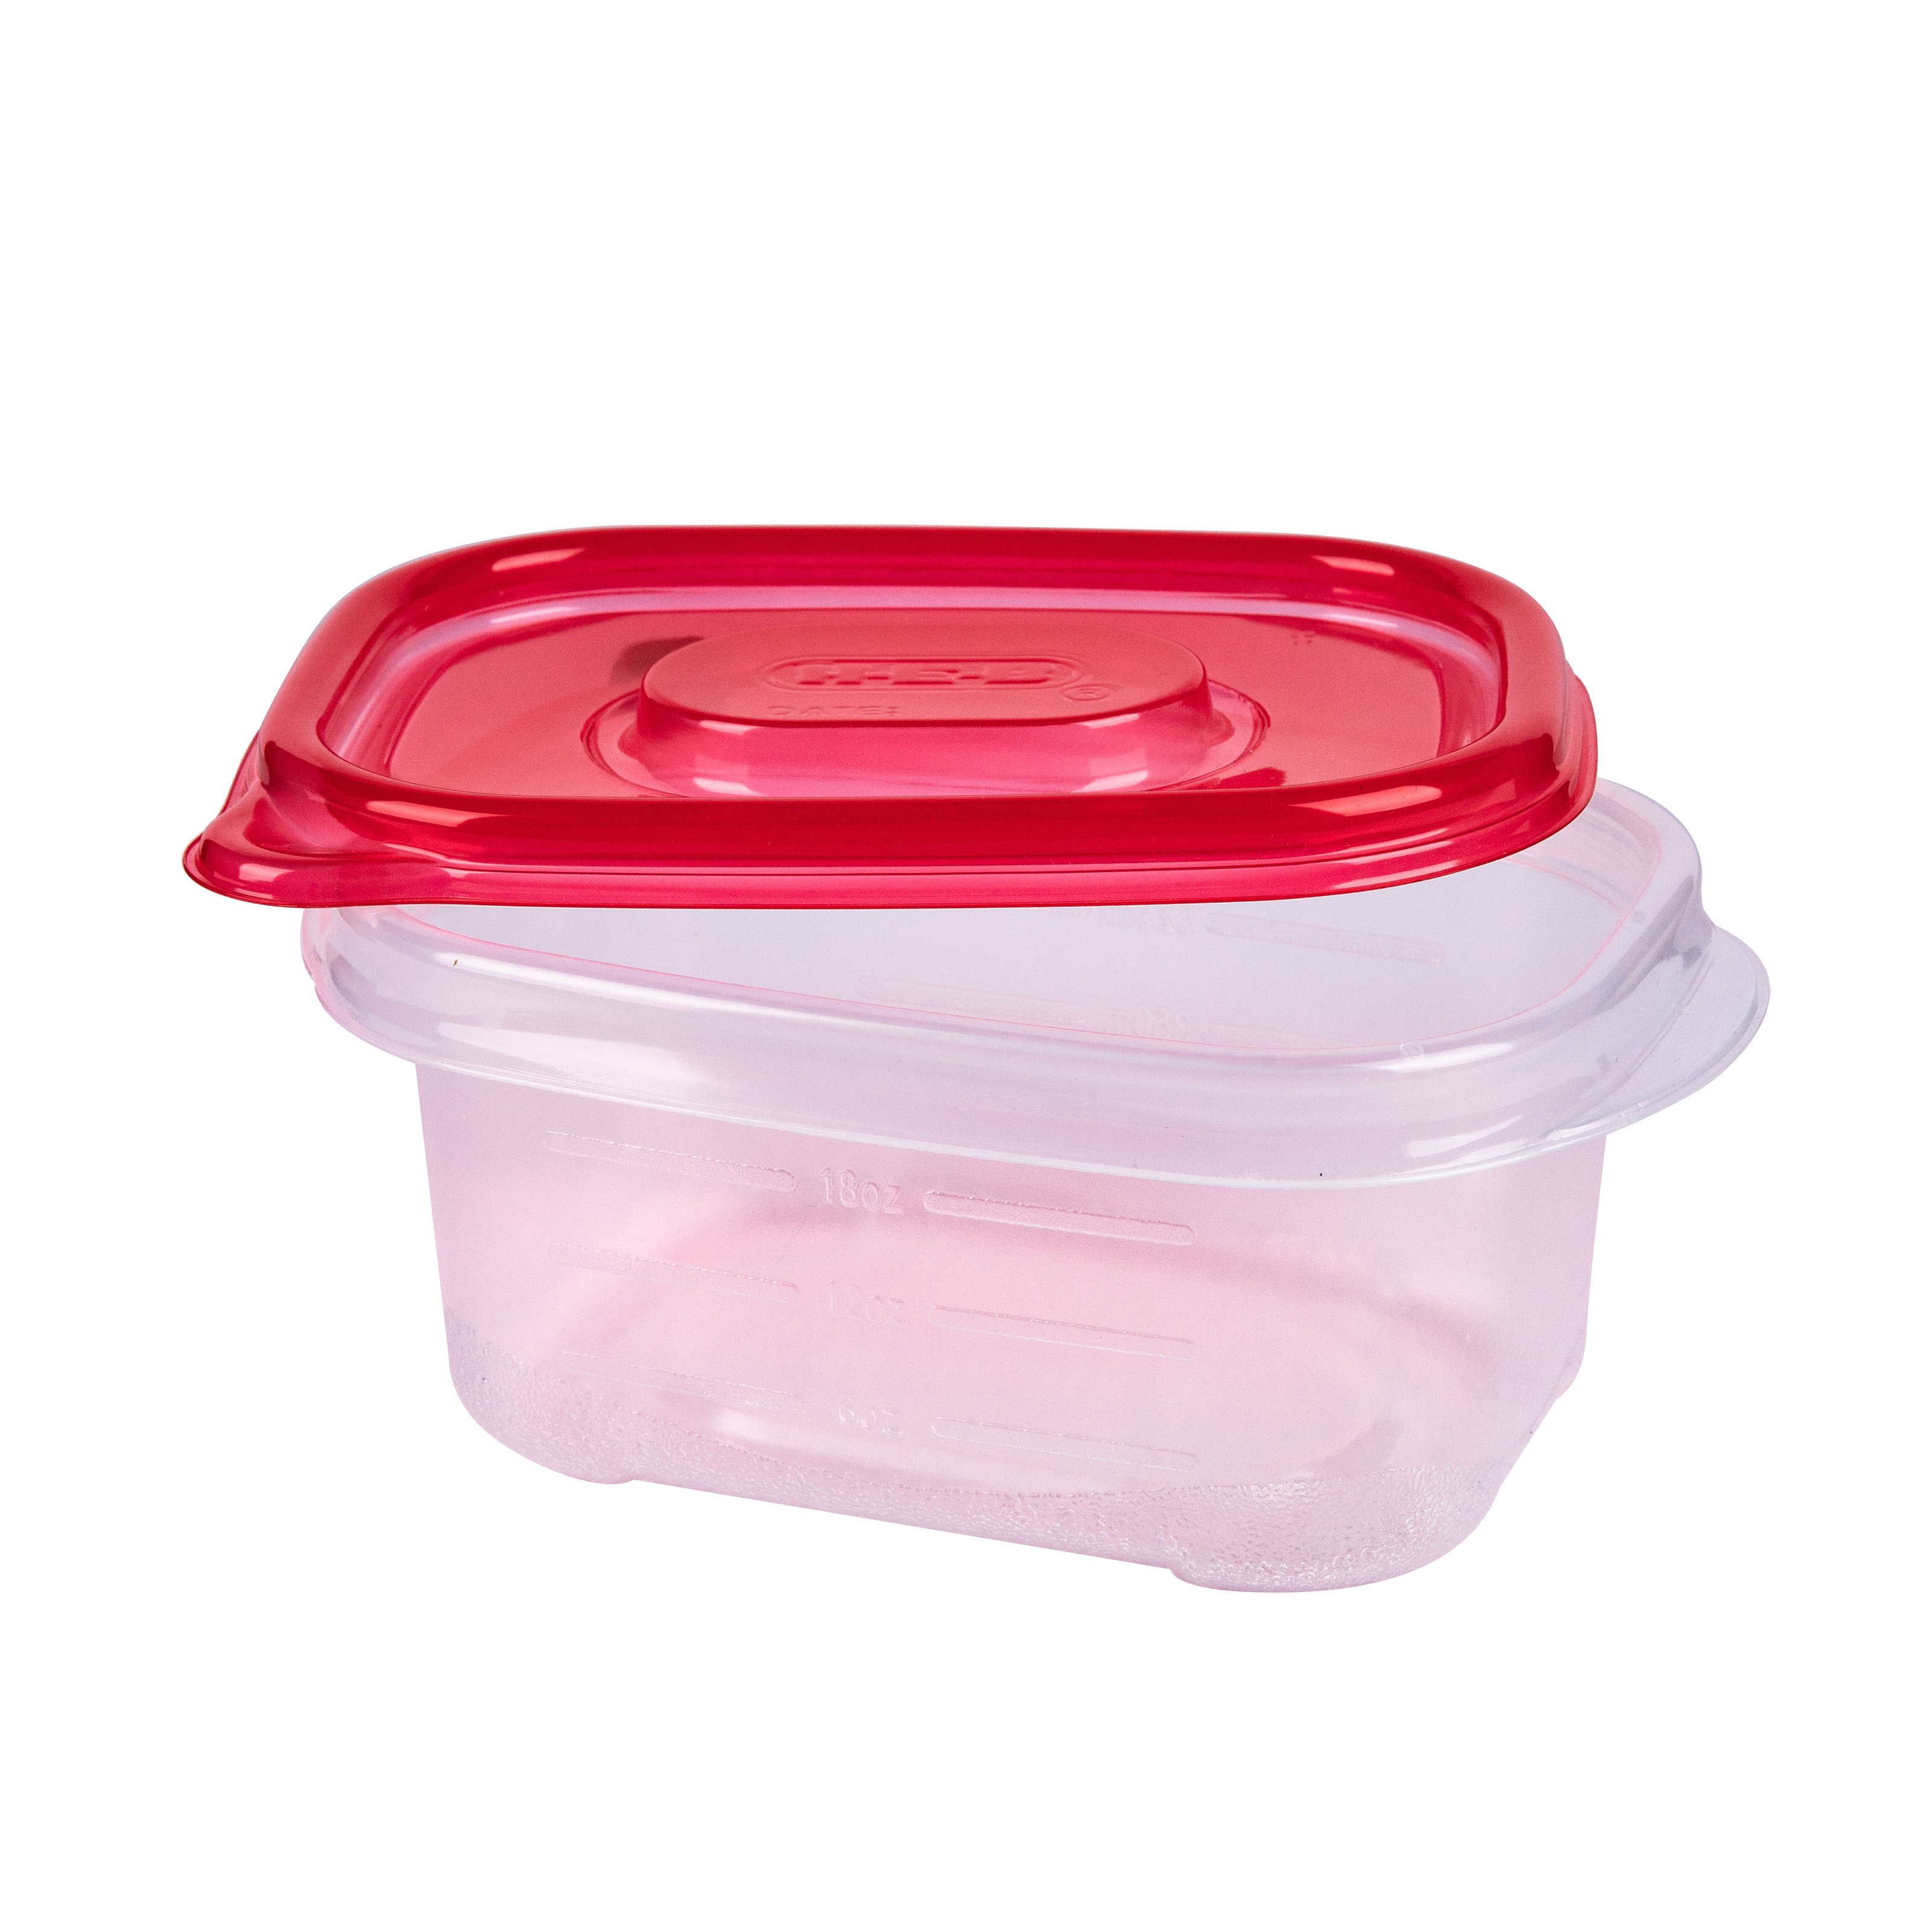 Ziploc Endurables Silicone Container - Small - Shop Food Storage at H-E-B